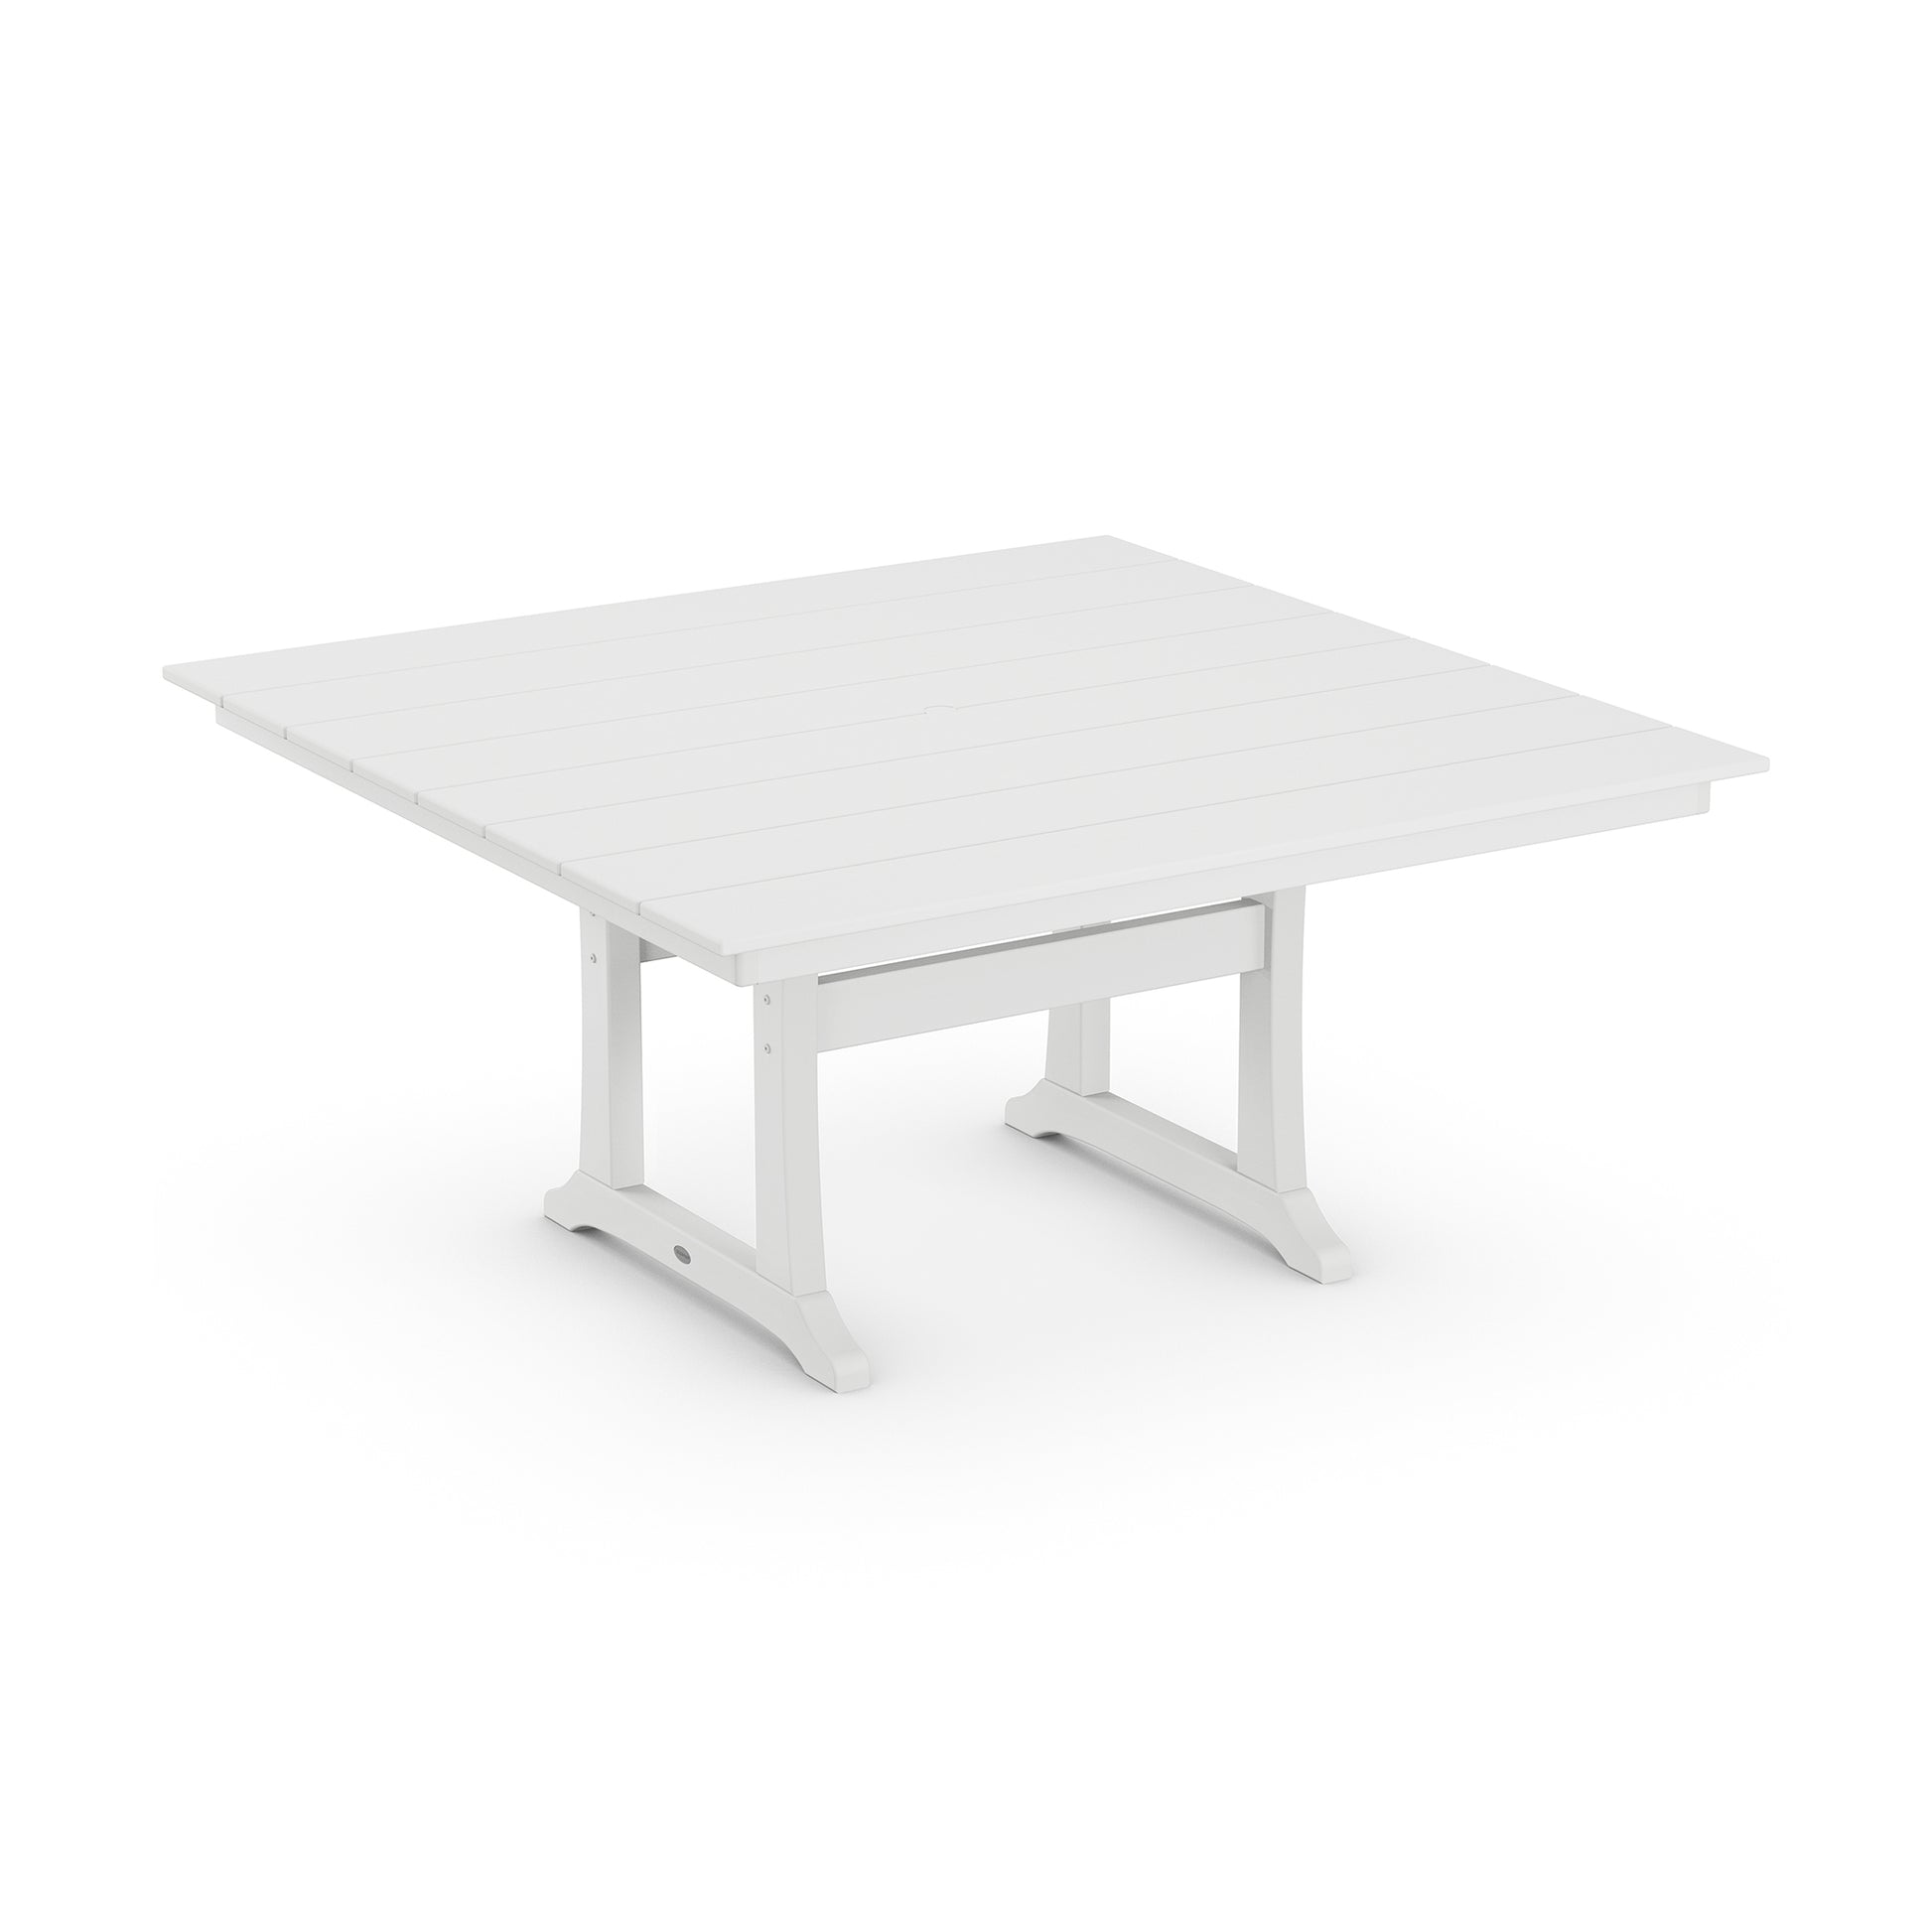 A simple white square POLYWOOD® Farmhouse Trestle 59" Dining Table with plank-style top and sturdy legs, displayed on a plain white background.